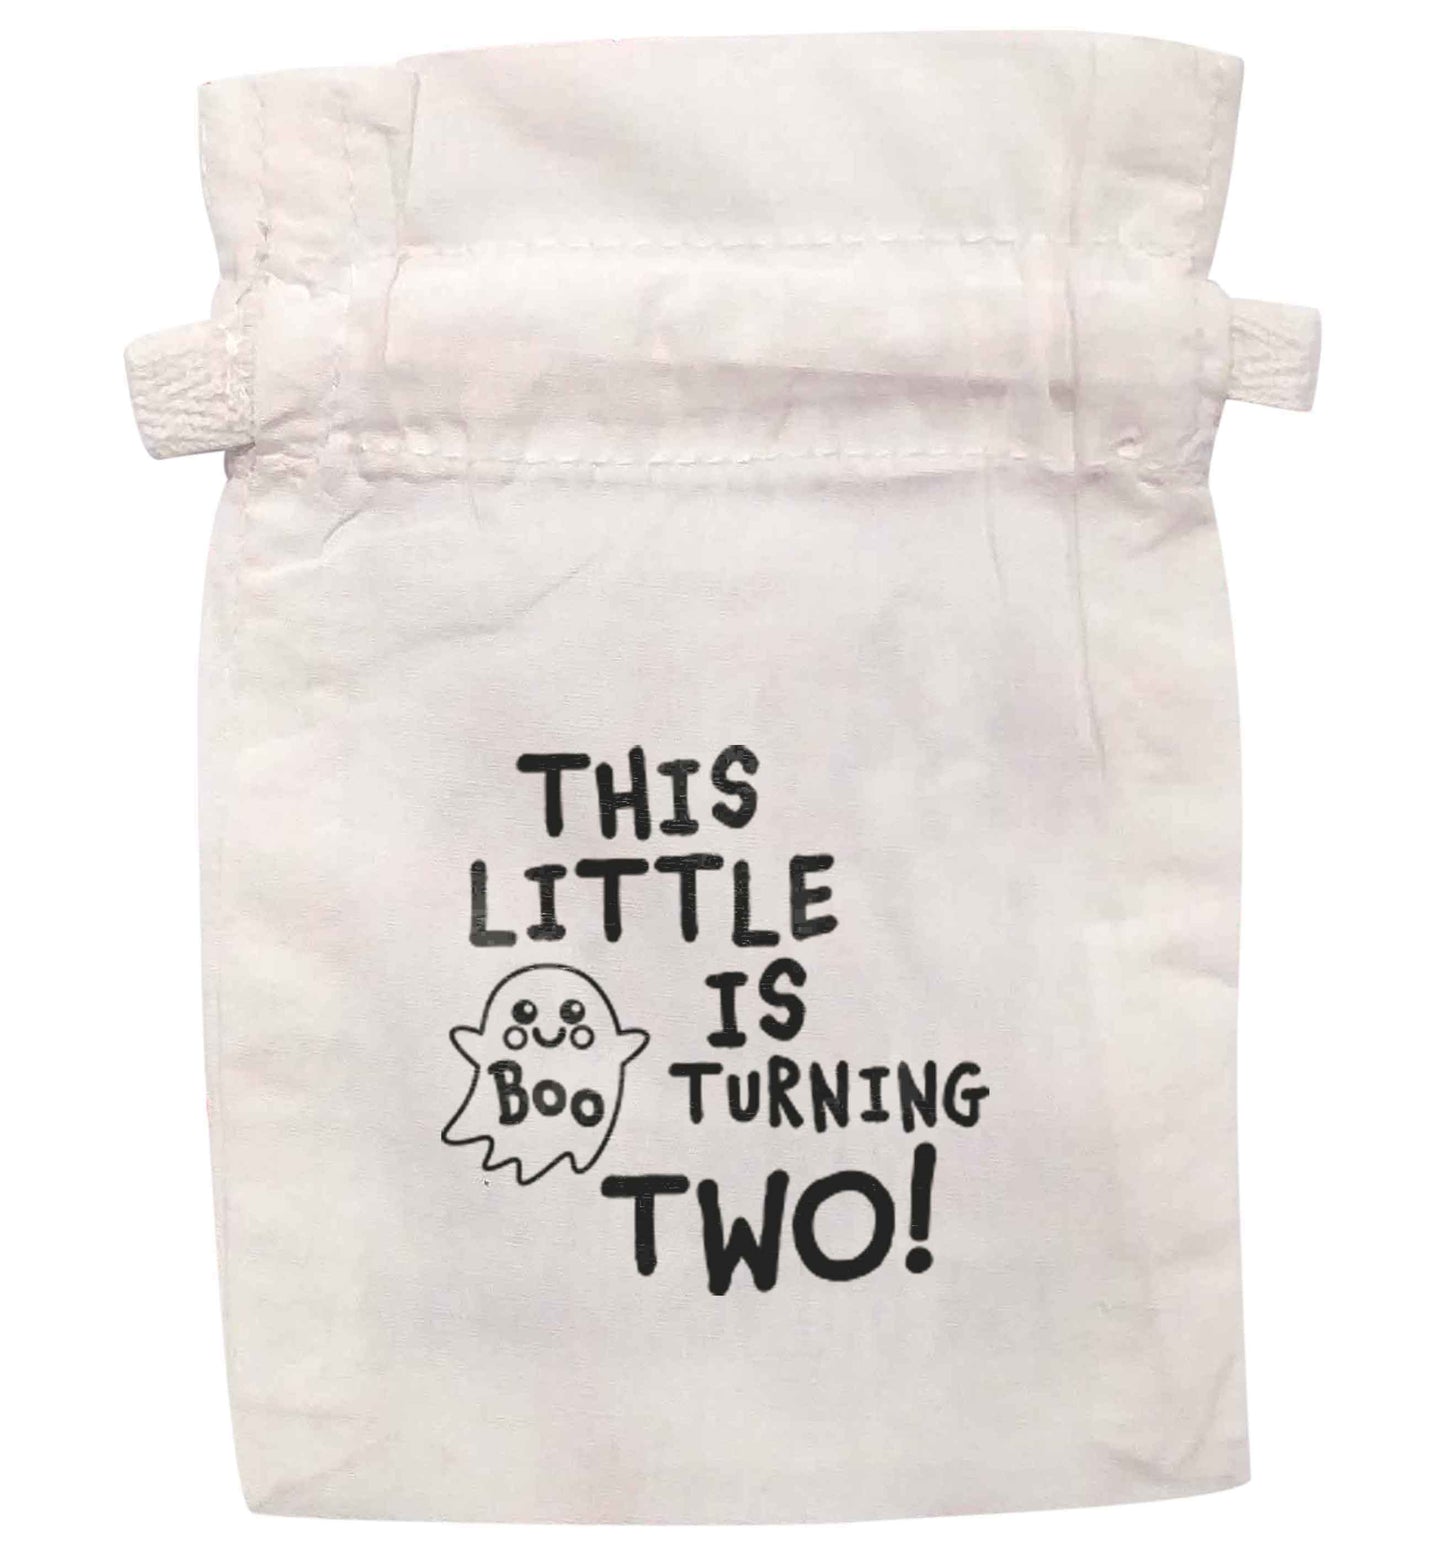 This little boo is turning two | XS - L | Pouch / Drawstring bag / Sack | Organic Cotton | Bulk discounts available!